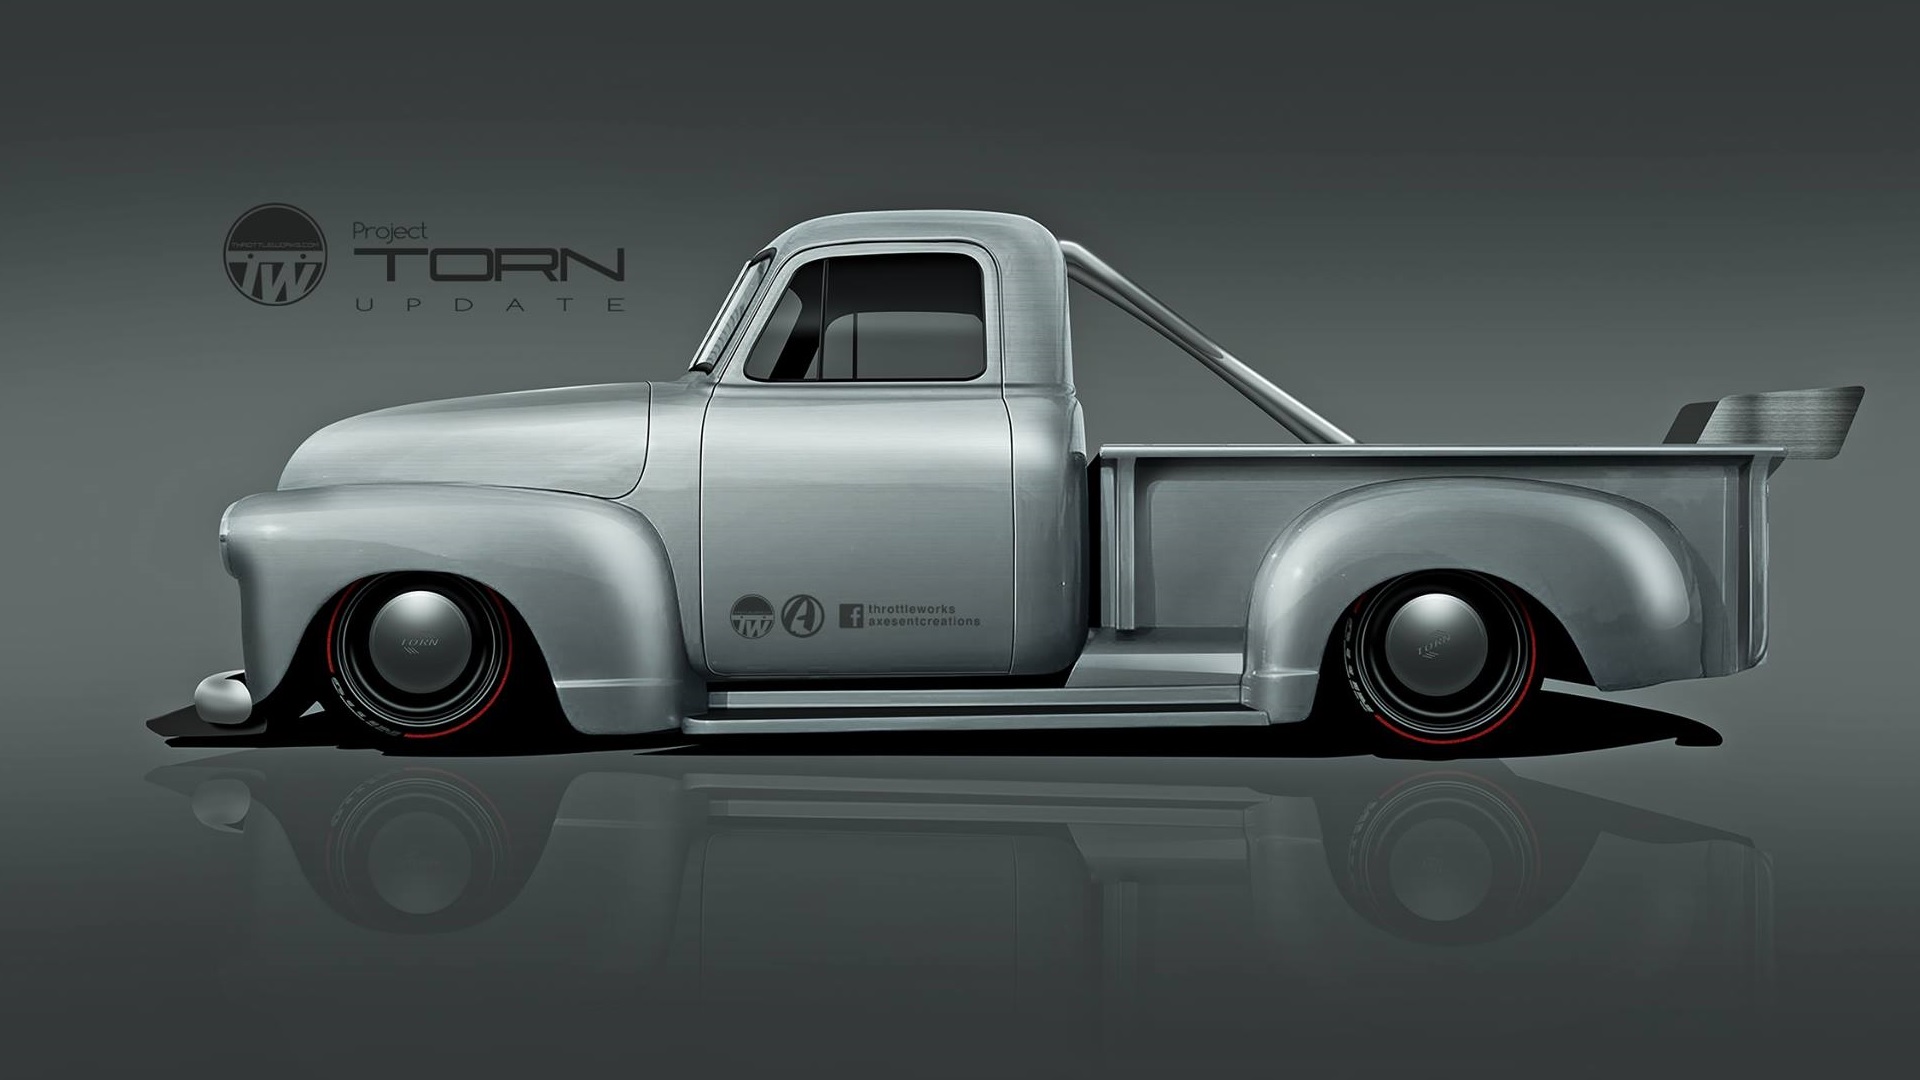 1954 Chevrolet Pickup Trucks Render Axesent Creations American Cars Chevy Chevrolet Side View Silver 1920x1080